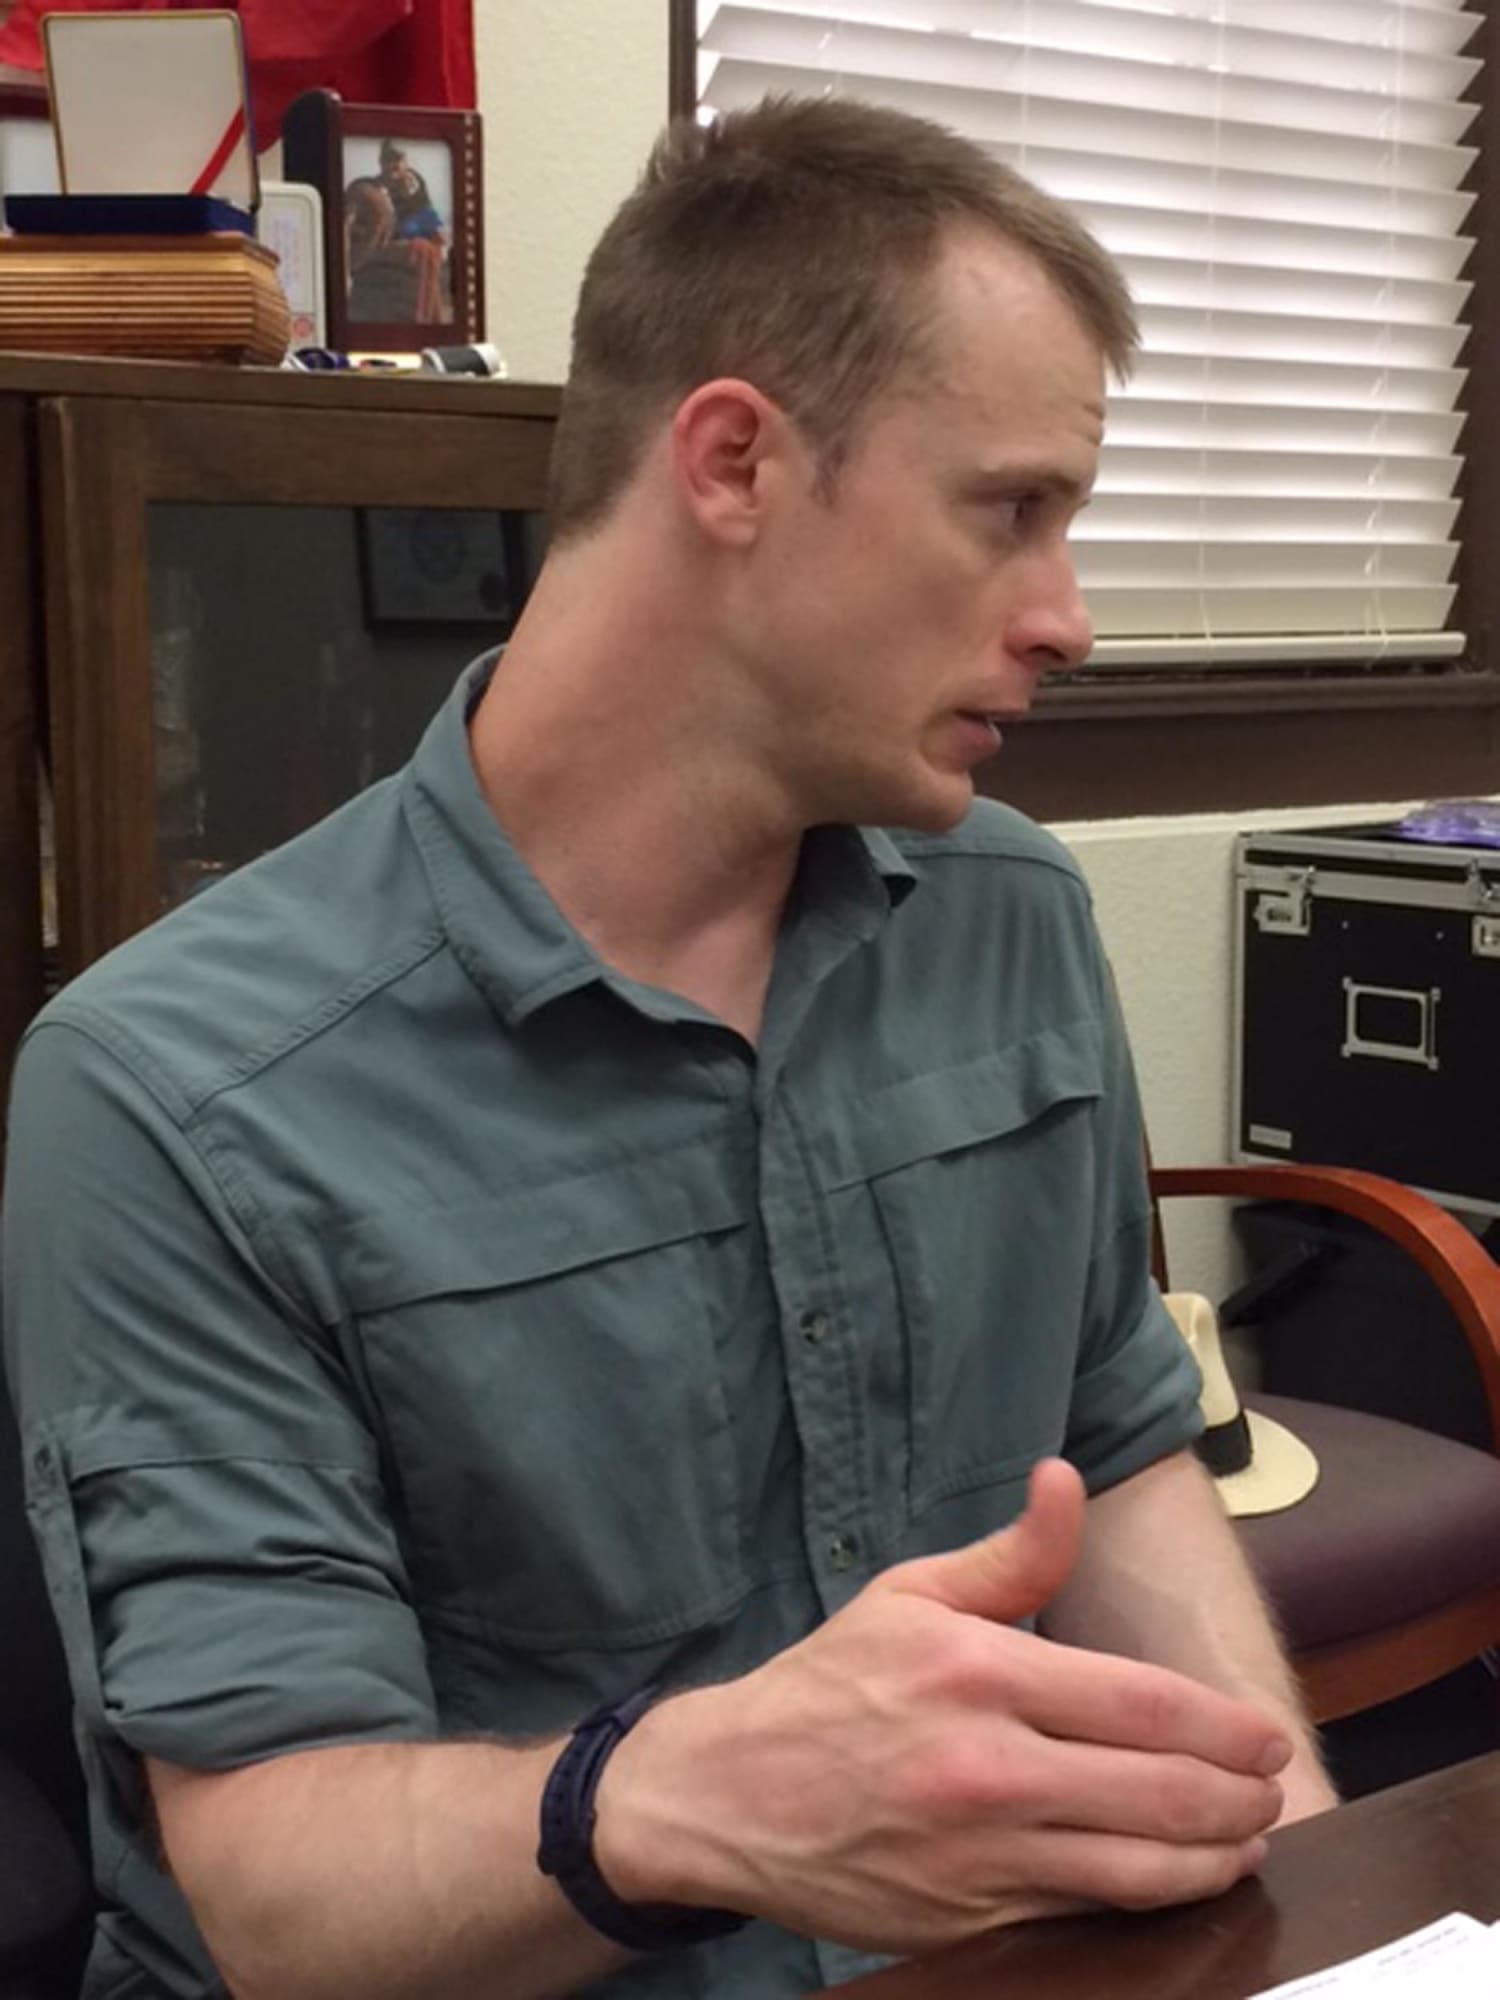 New Photos Show Sgt. BOWE BERGDAHL Prepping for Questioning - NBC.